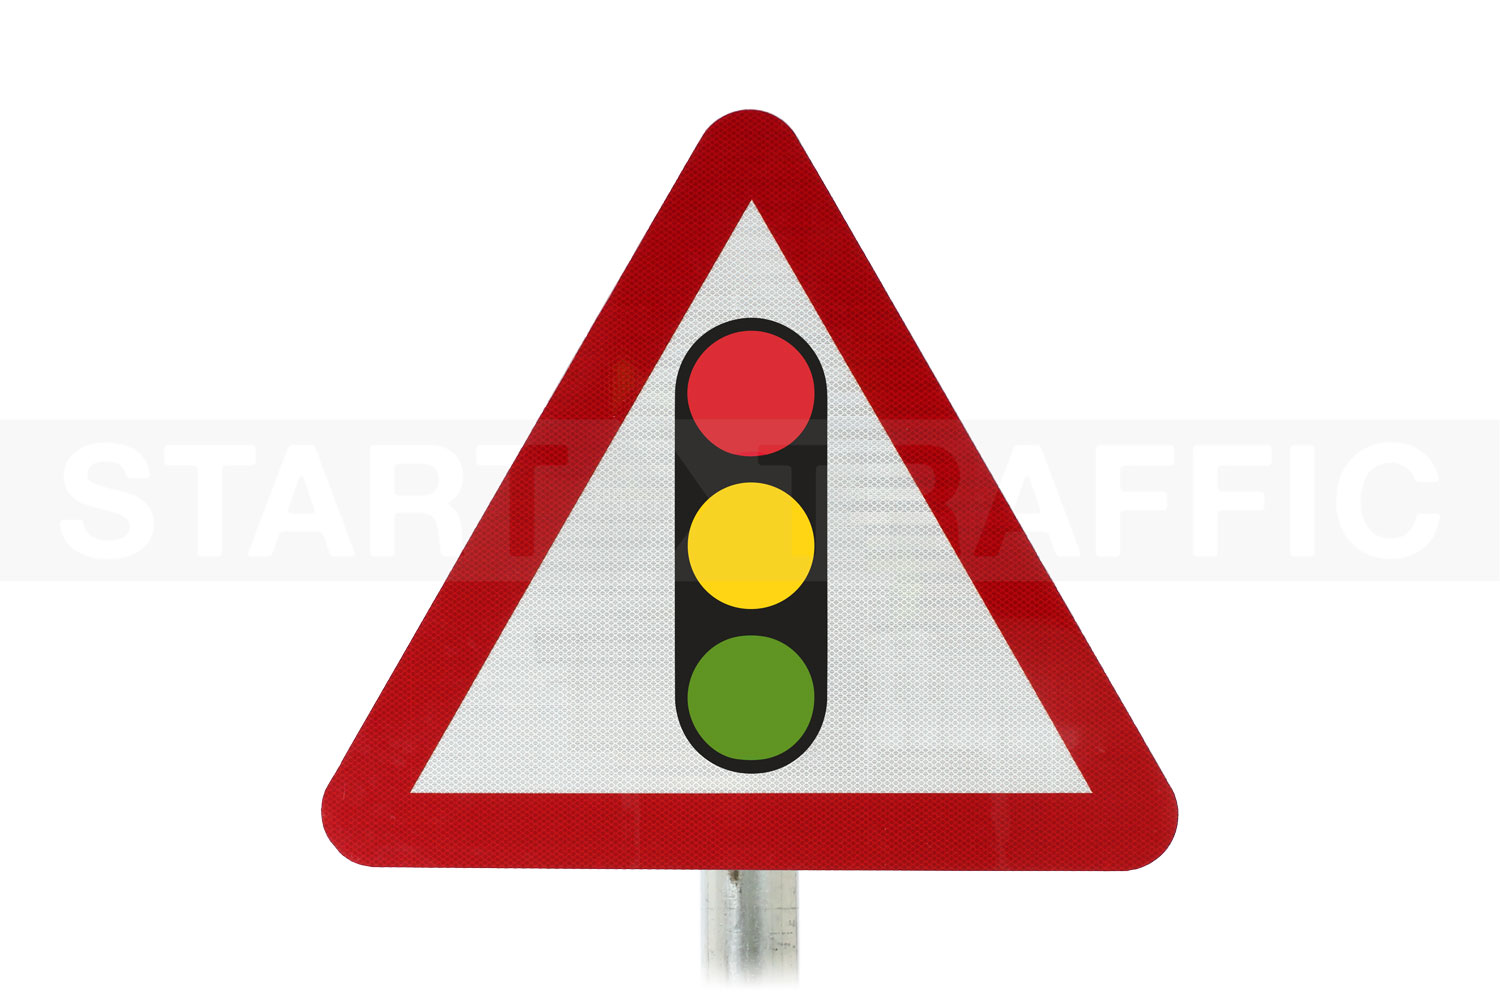 Traffic Lights Permanent Road Sign 543 | In Stock | Buy Now!